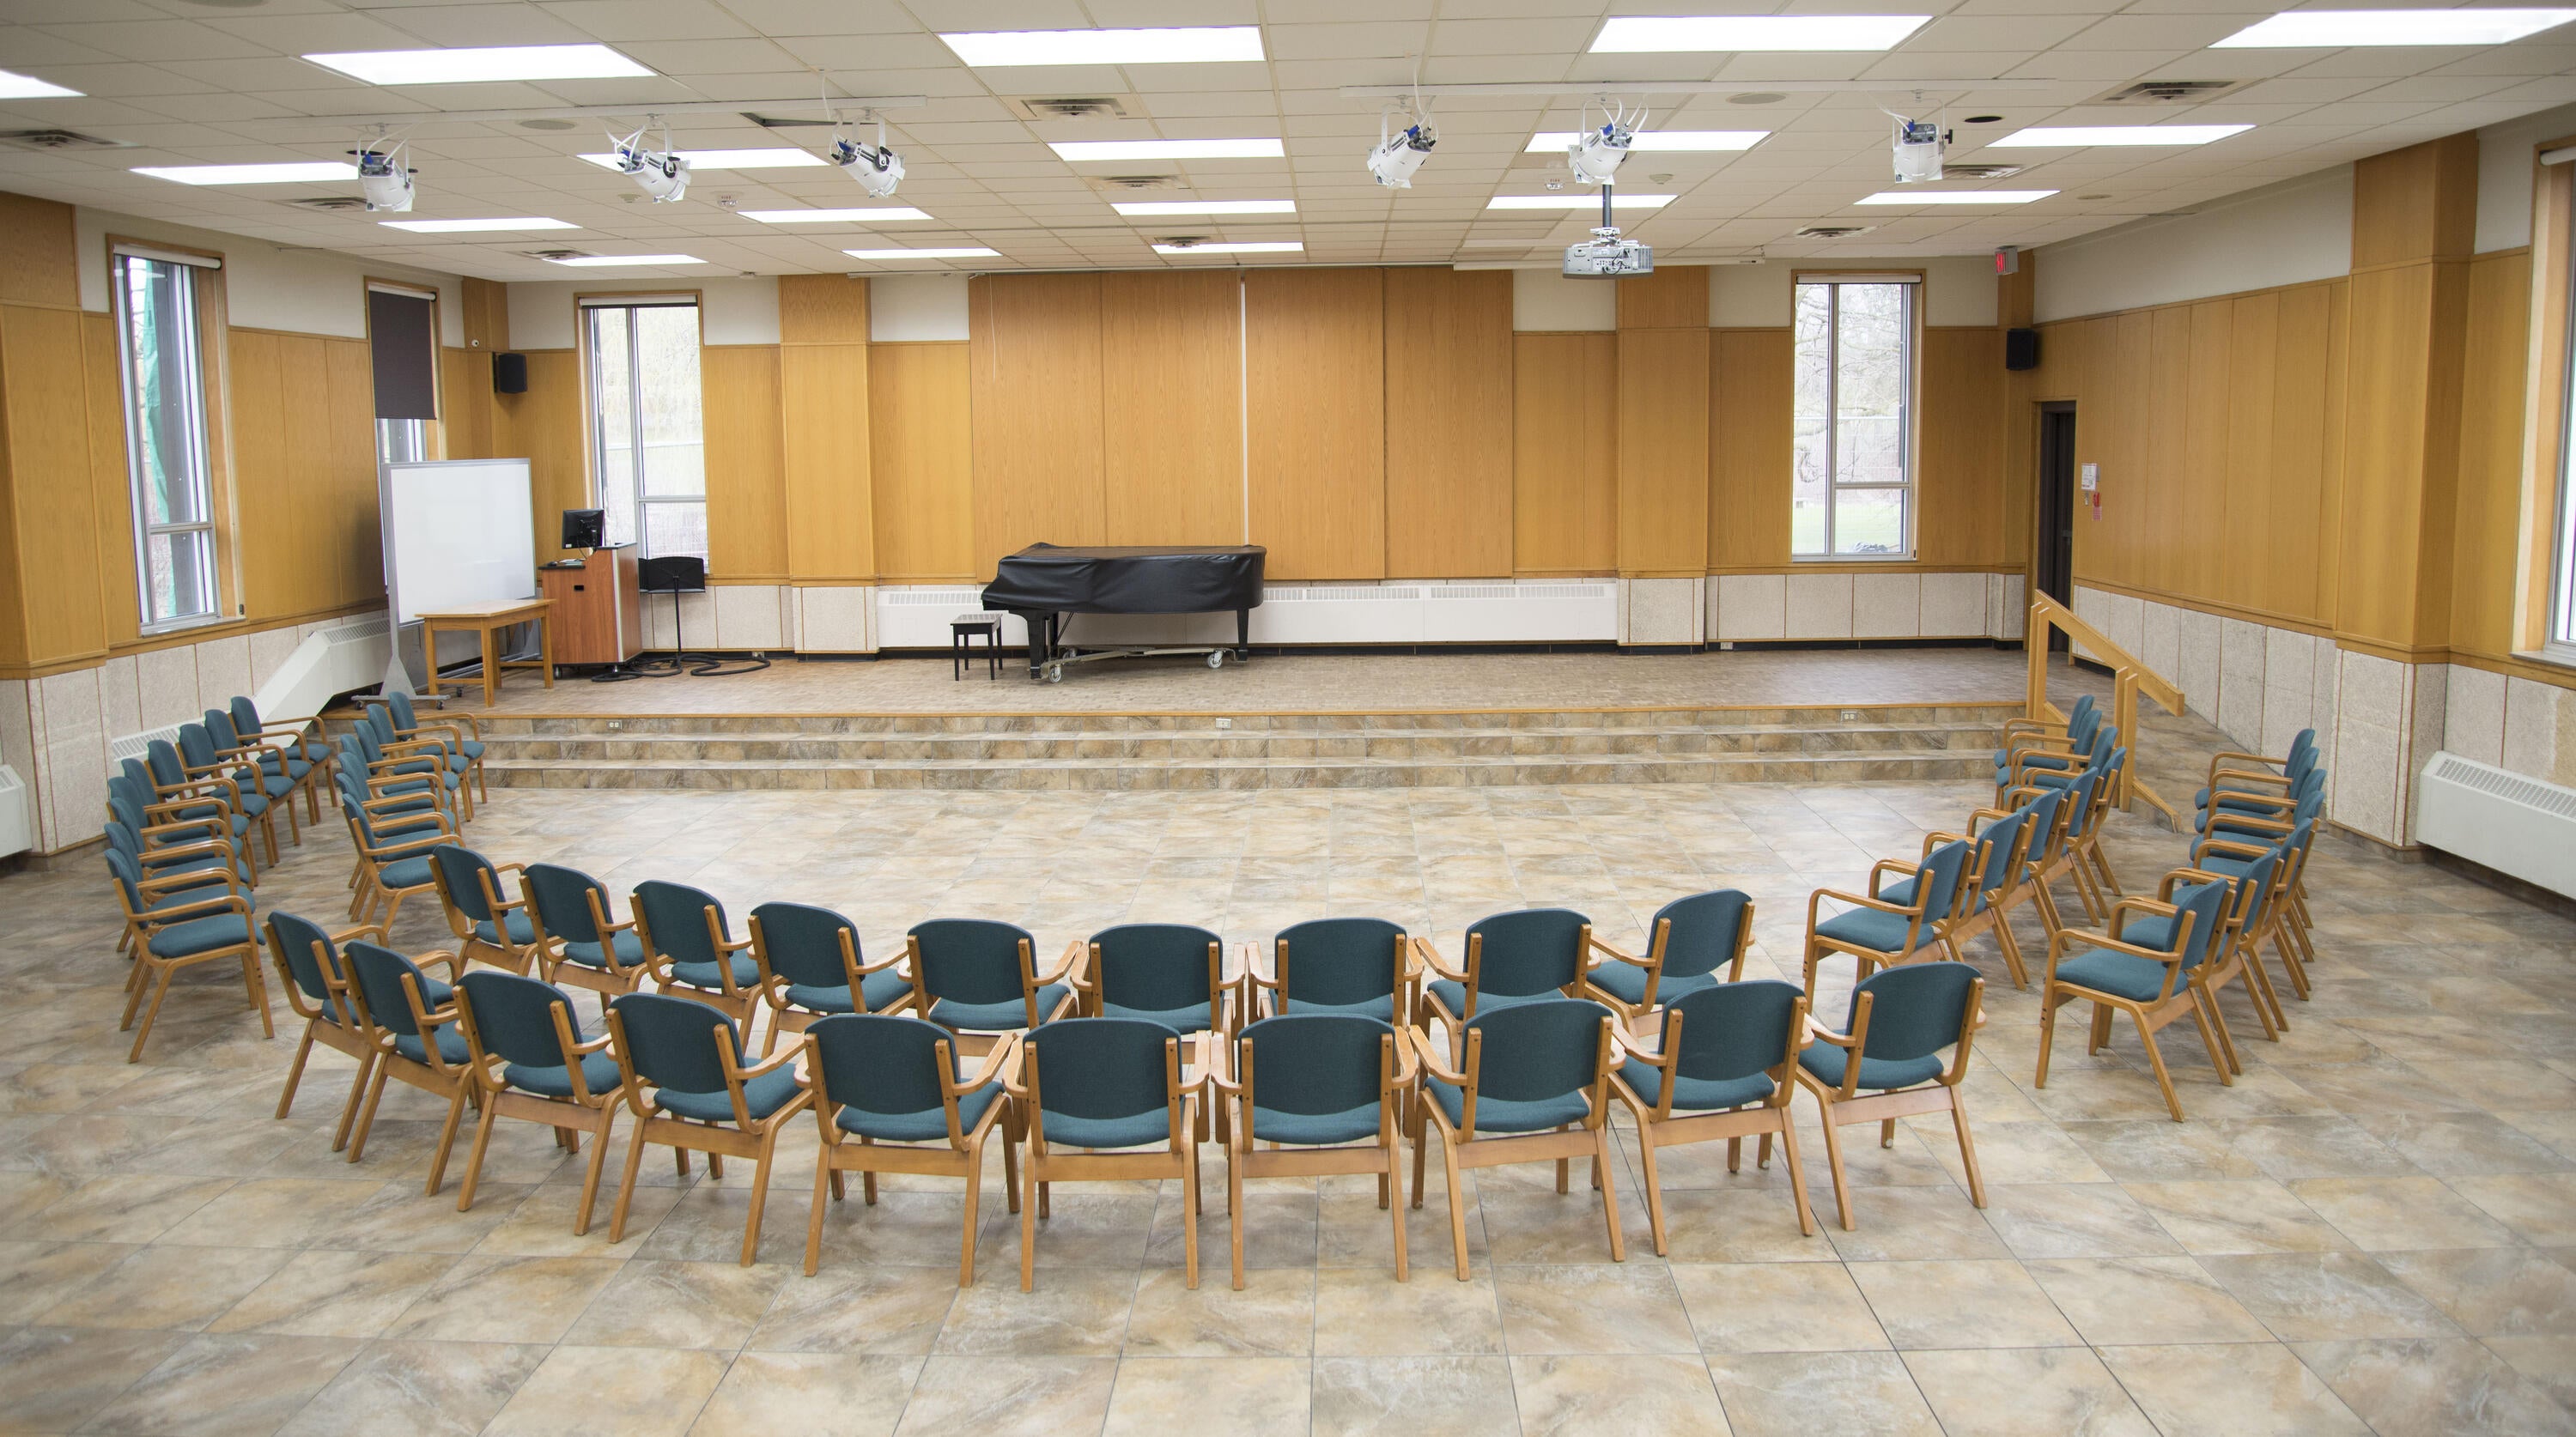 Large hall with tables, chairs, a projector, and a grand piano